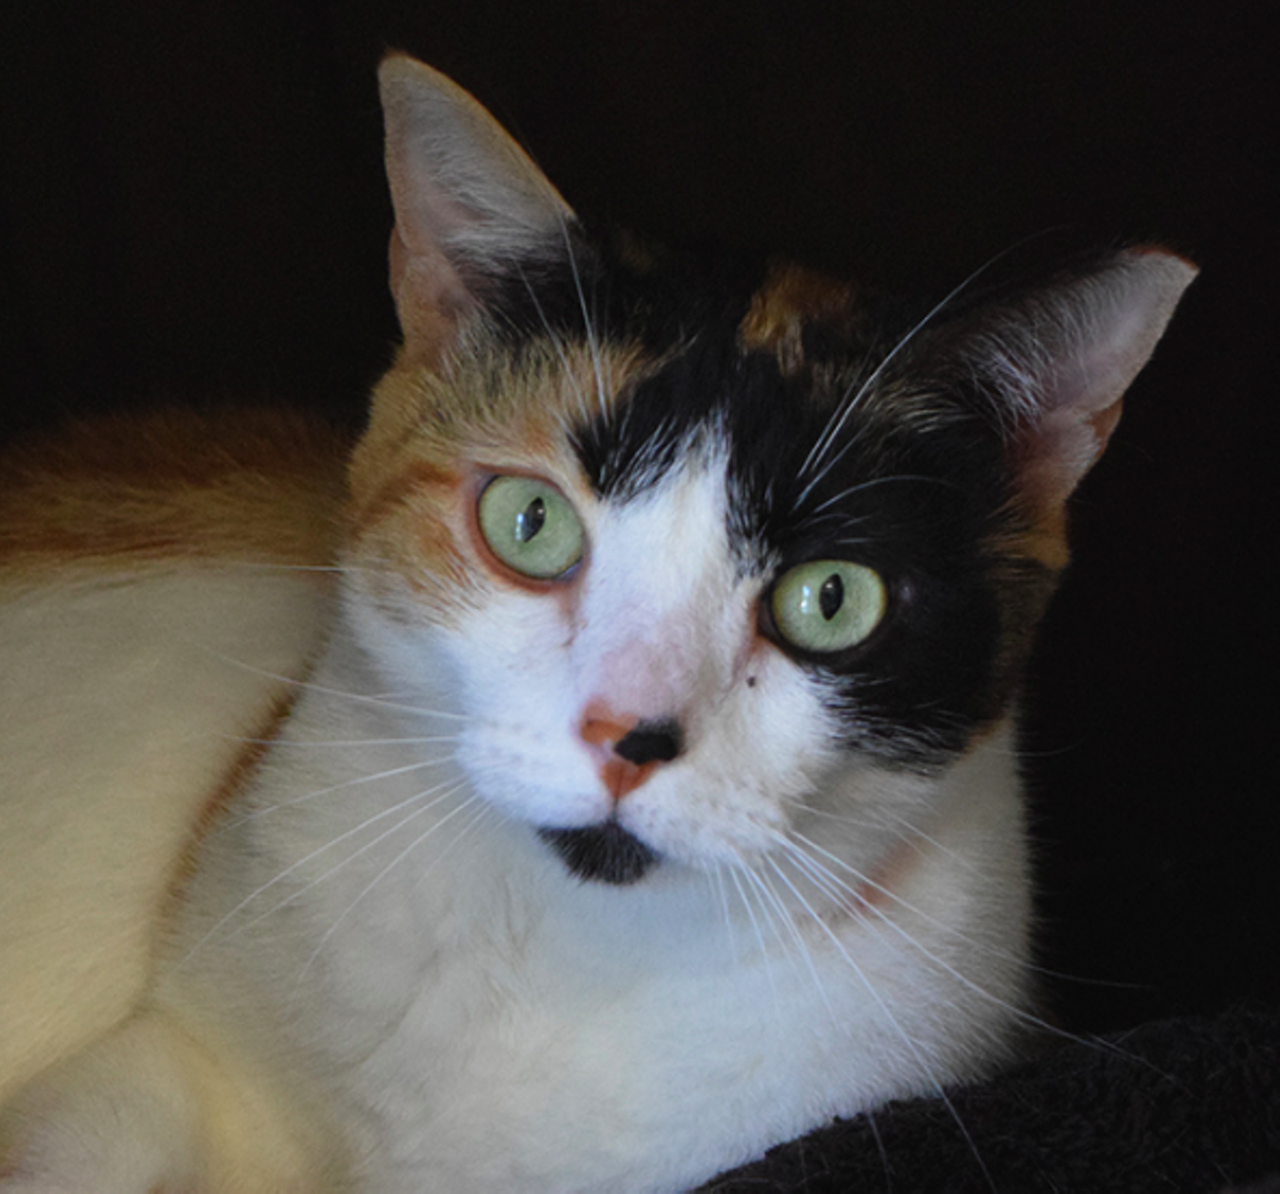 Summer
"Hi, there, I’m Summer! I can be affectionate when I want to be. I’m still fairly new here, so I just need time to adjust and finally show my true, loving, personality! Come by and meet me today!"